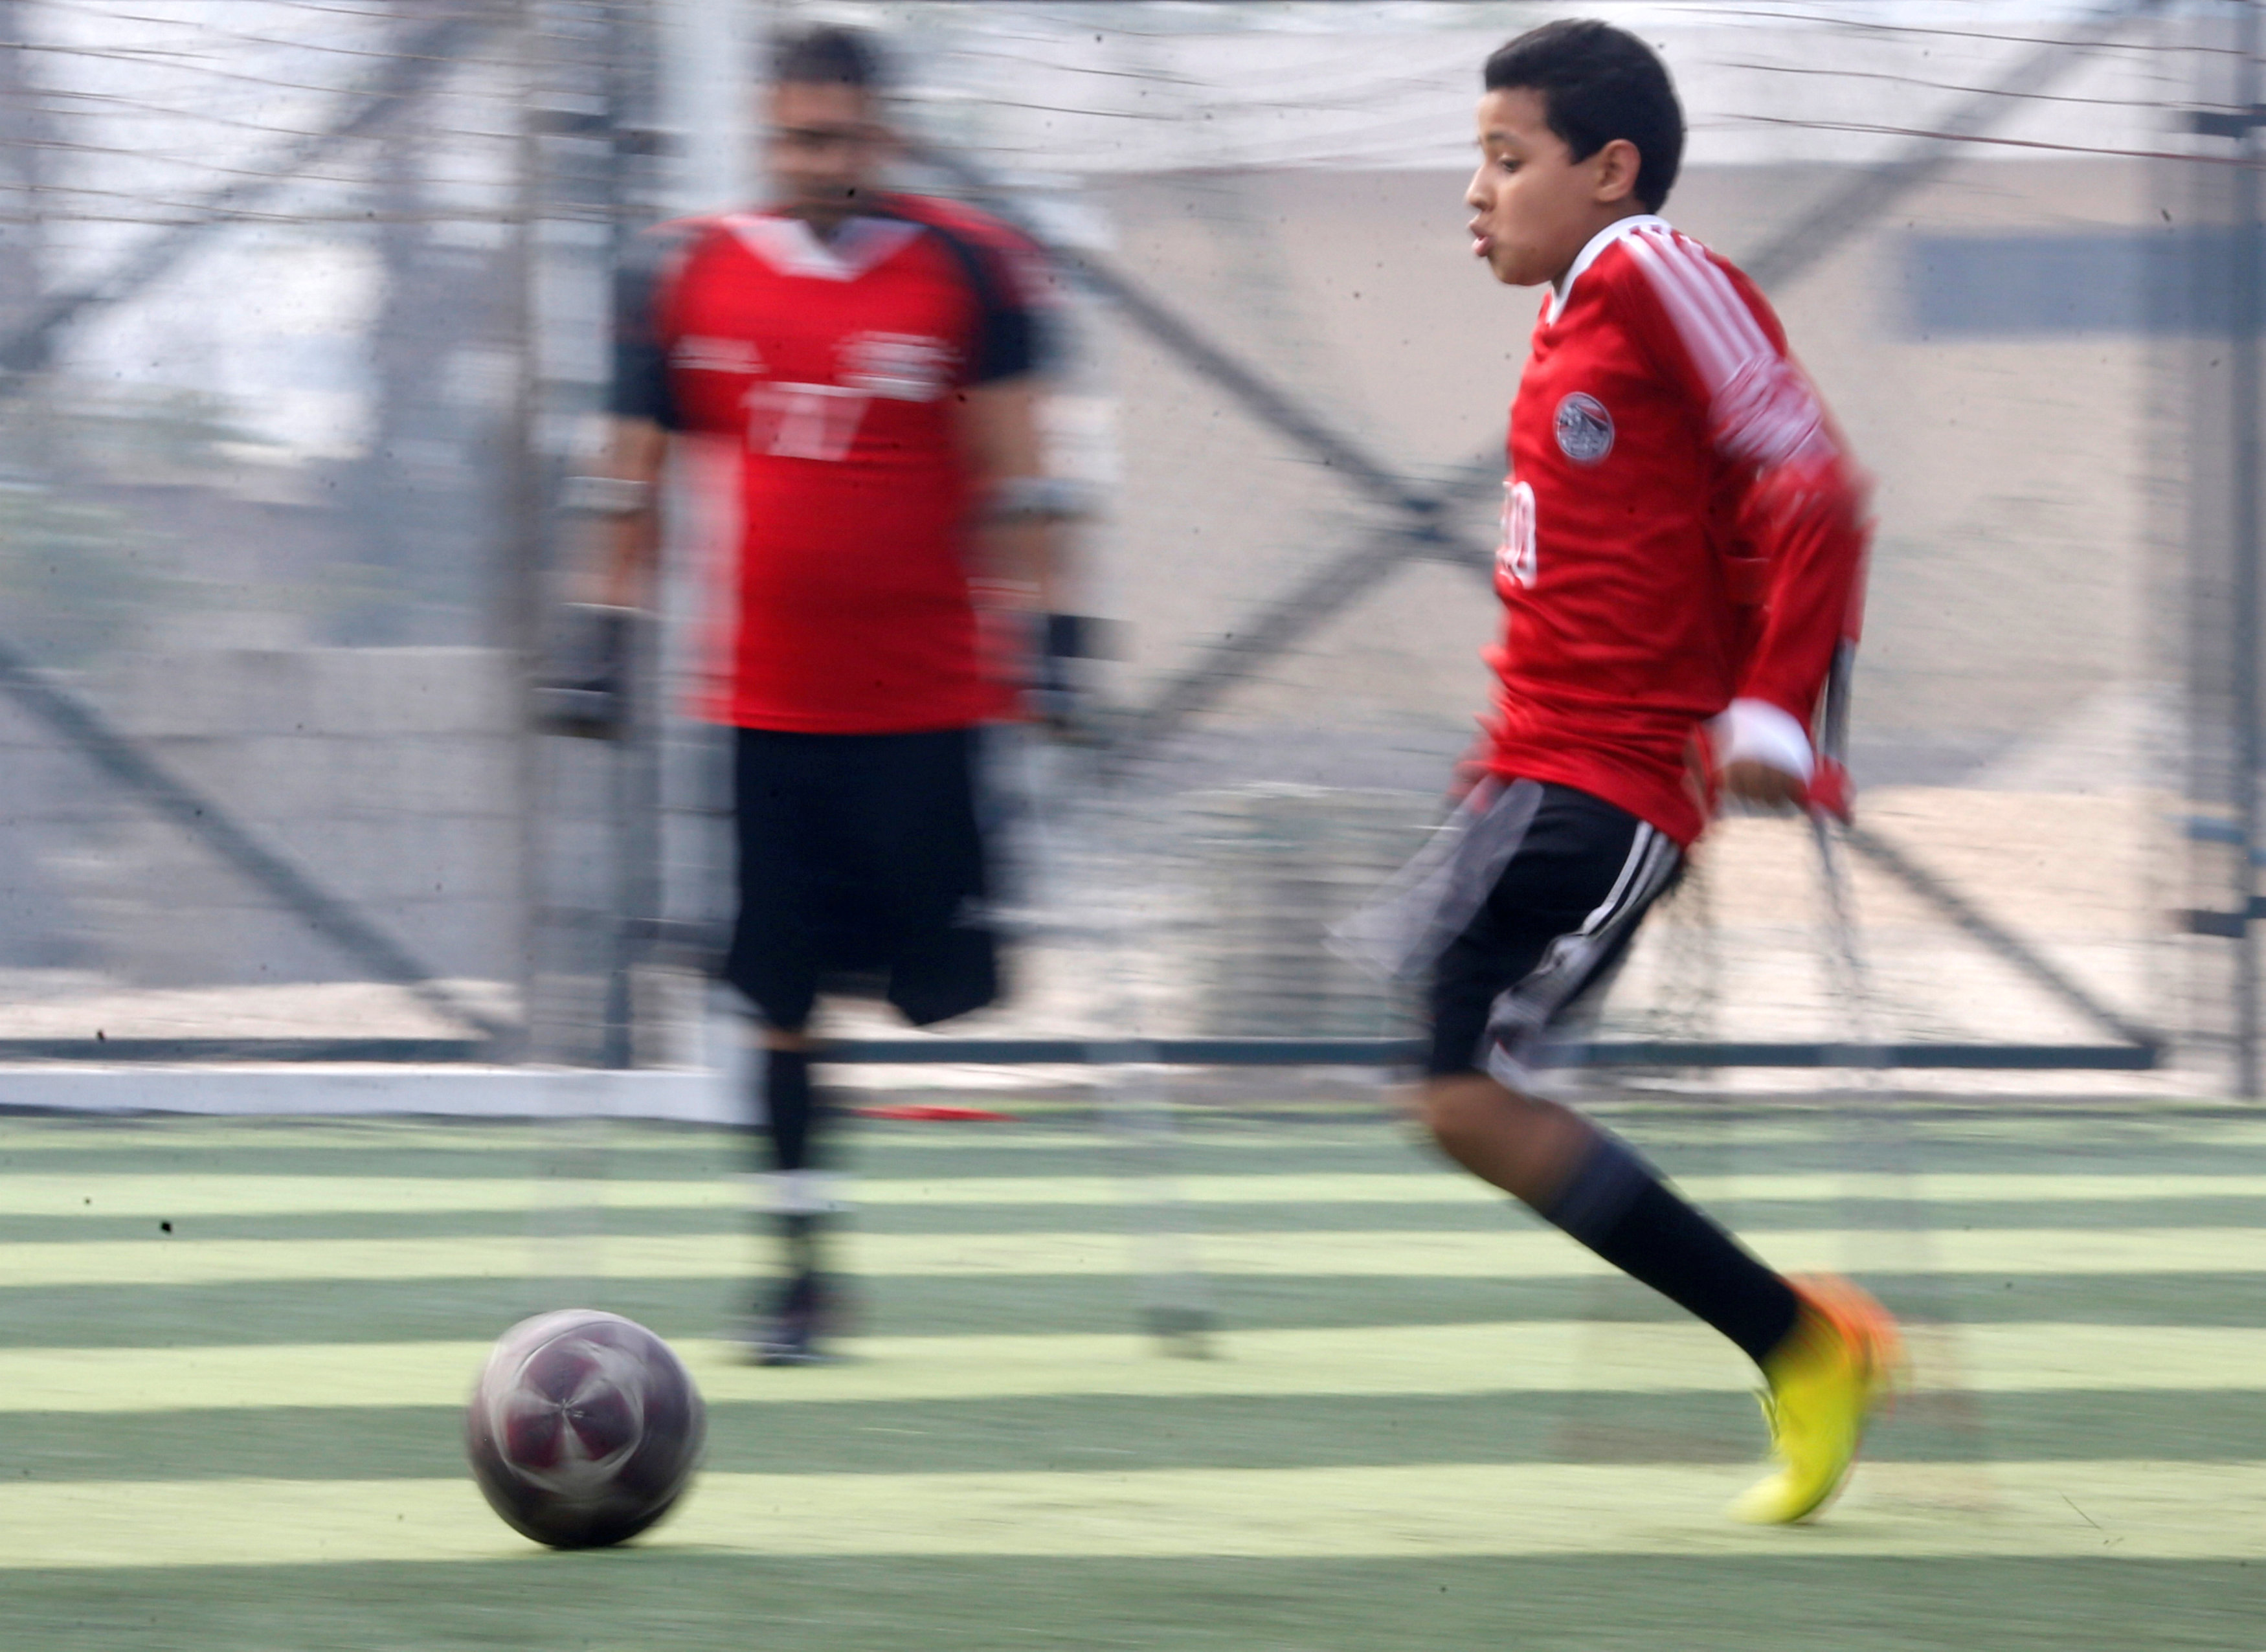 Egypt's disabled players aim for a soccer league of their own